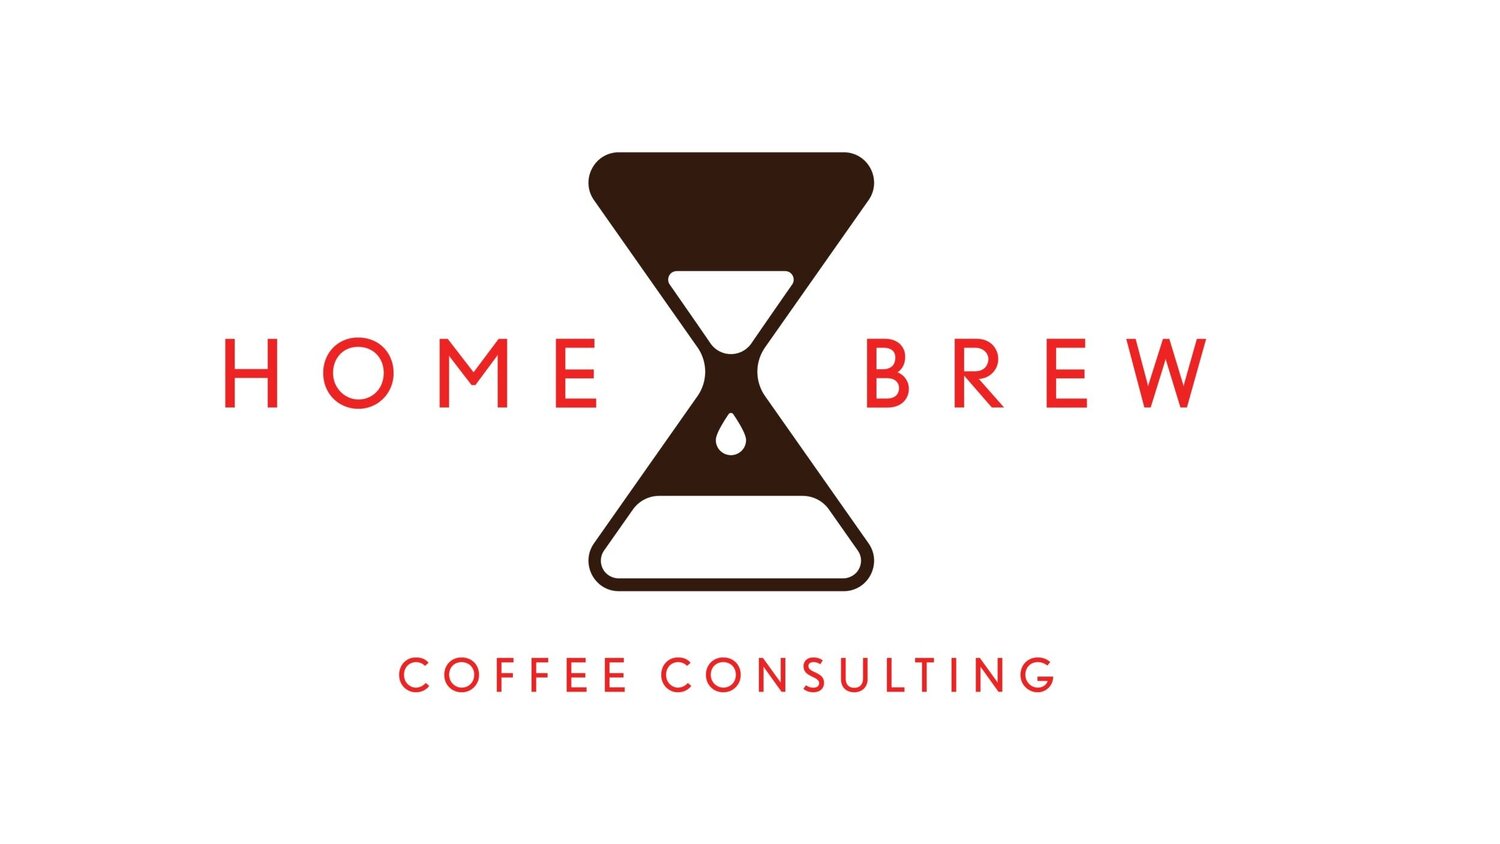 Home Brew Coffee Consulting